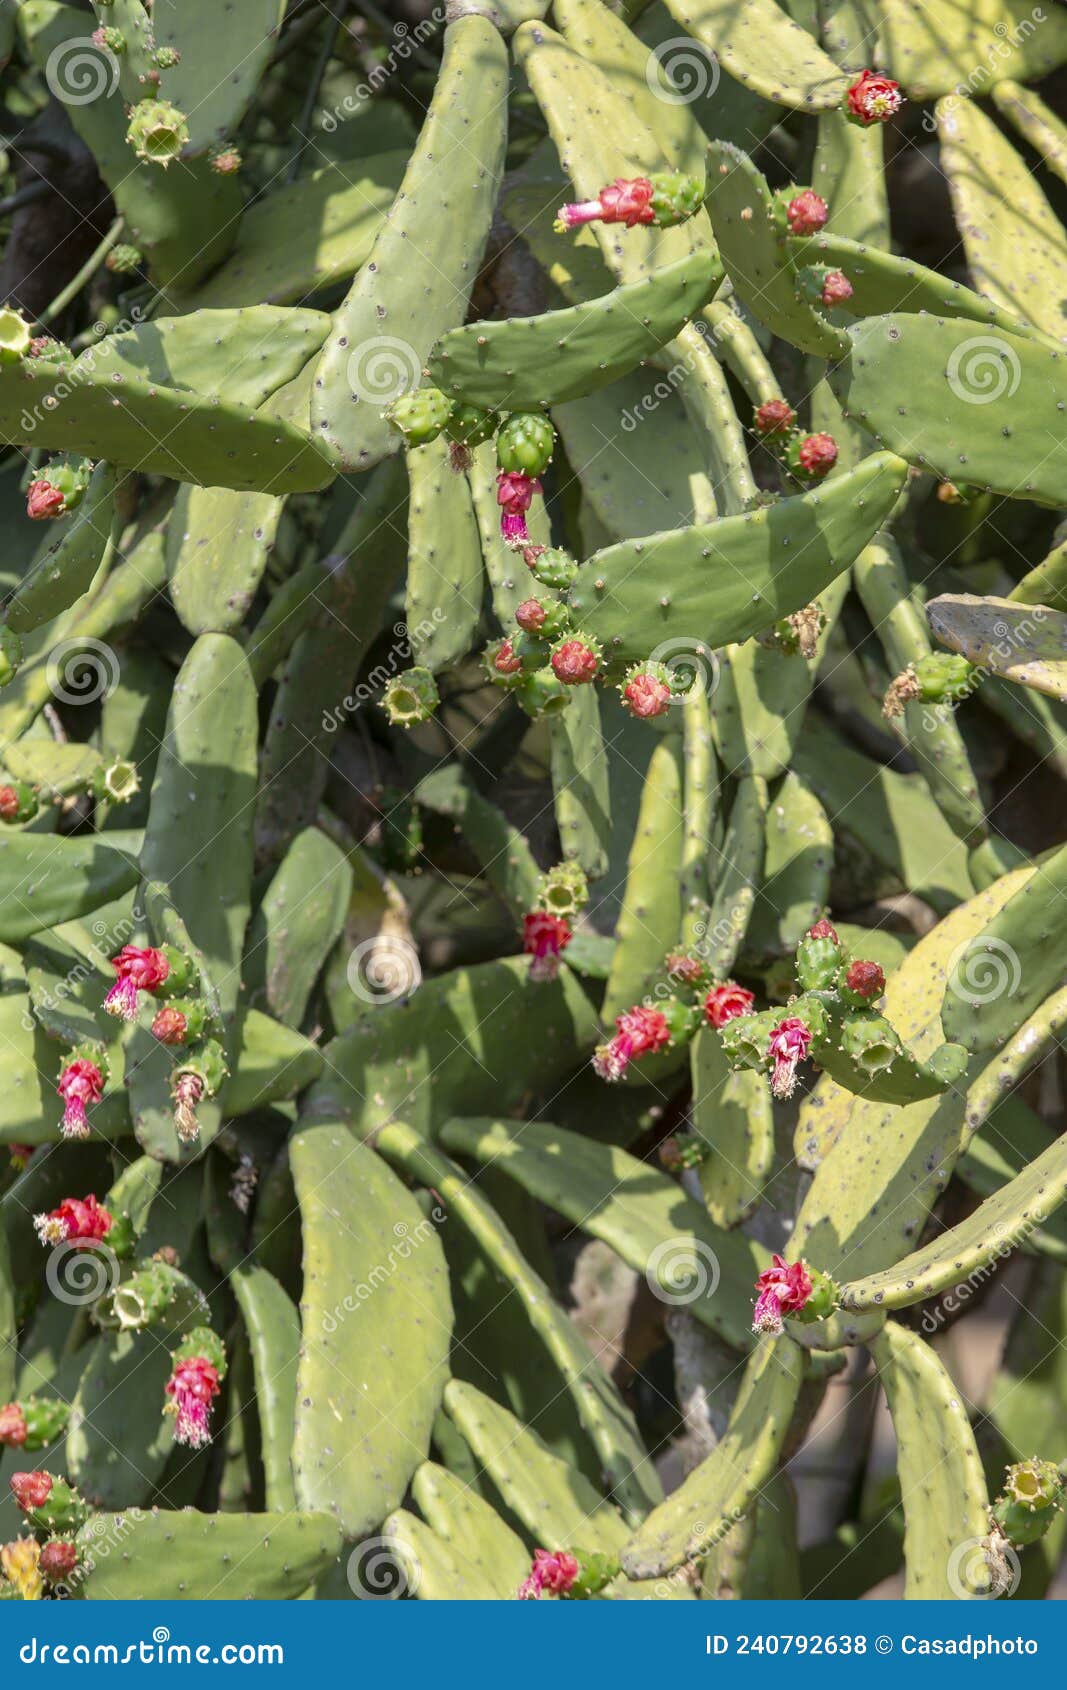 plant in blossom of the cactus palma